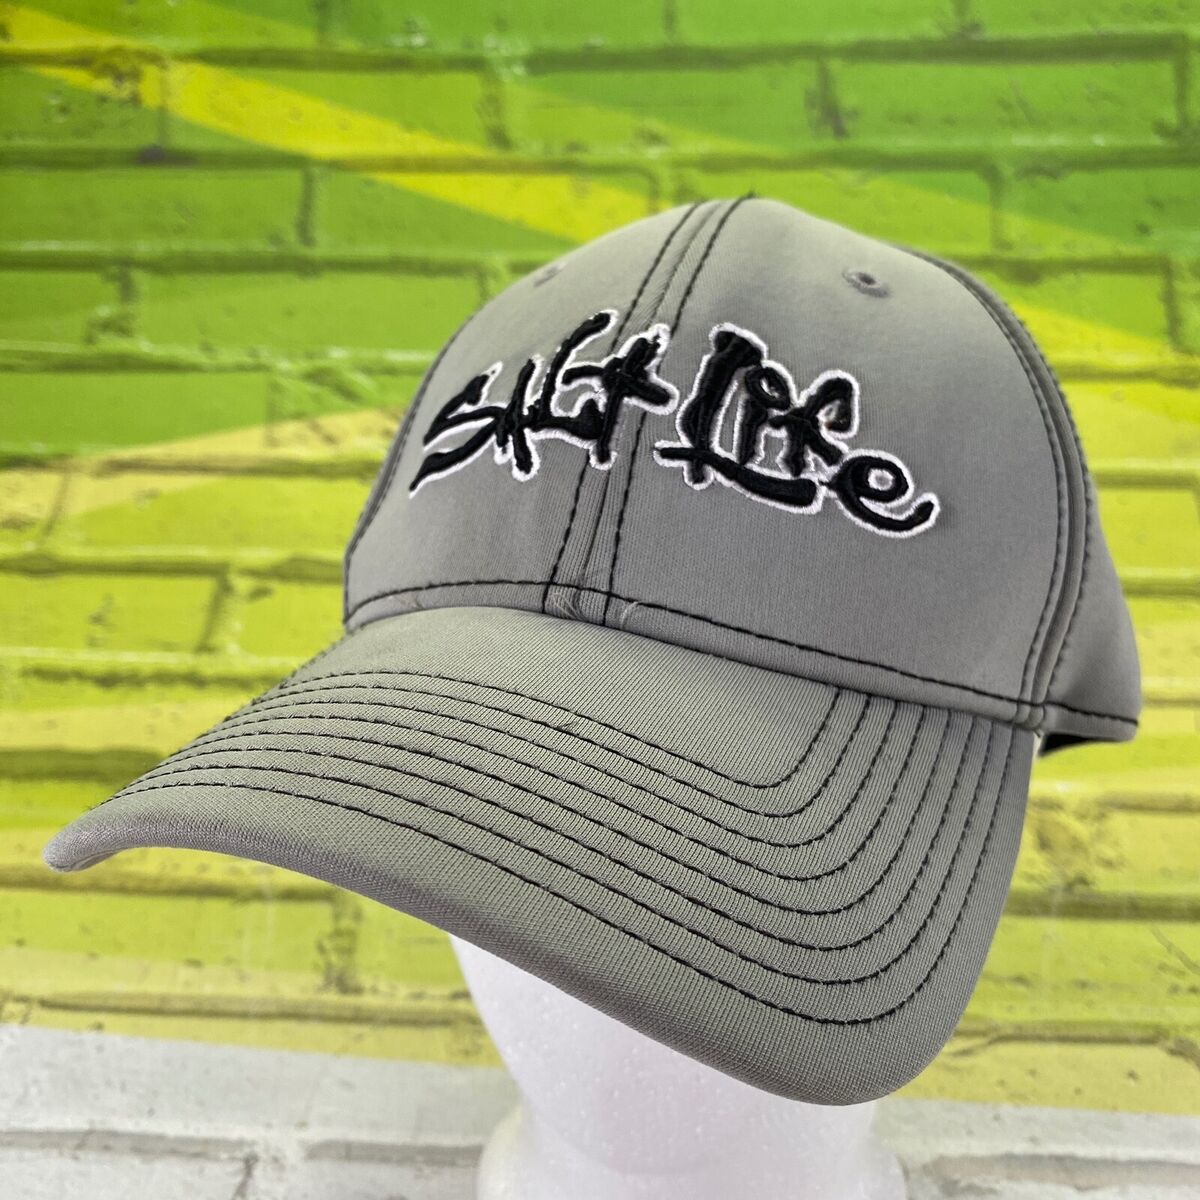 Salt Life A-Flex Fit Embroidered Fishing Hat Grey Black One Size Fits Most